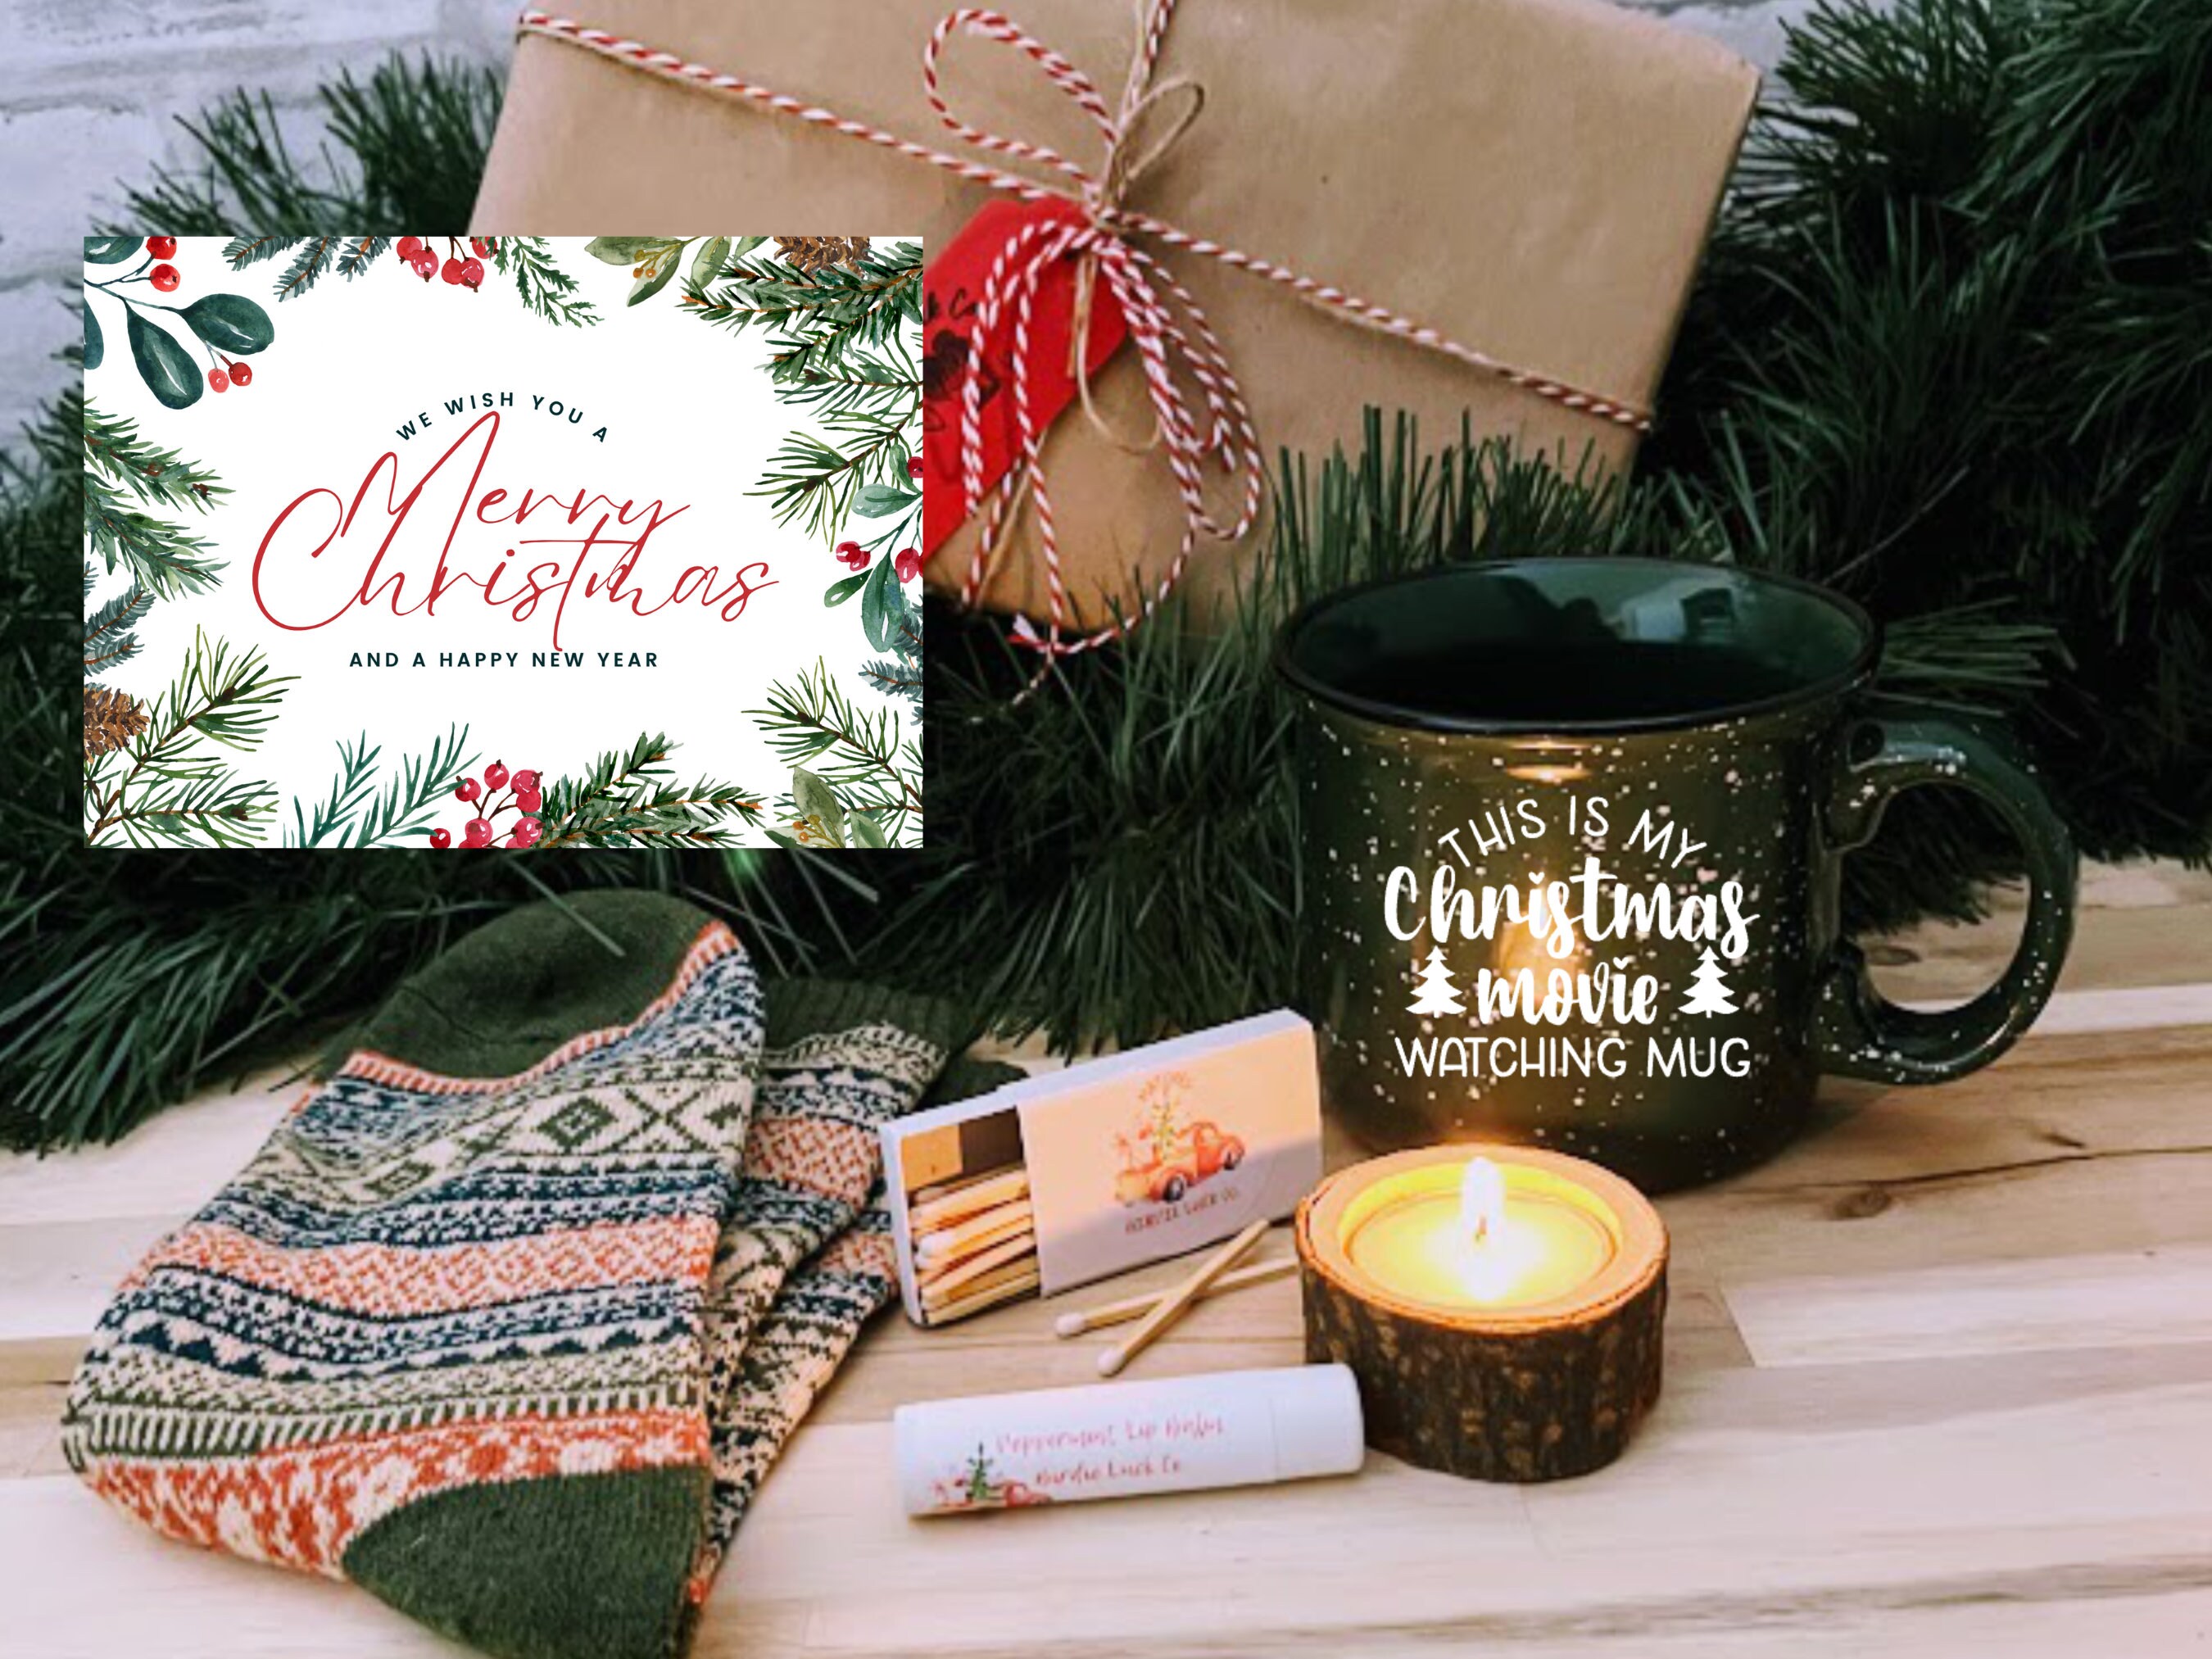 Cozy Holiday Gifts for Women - Dressed in Faith